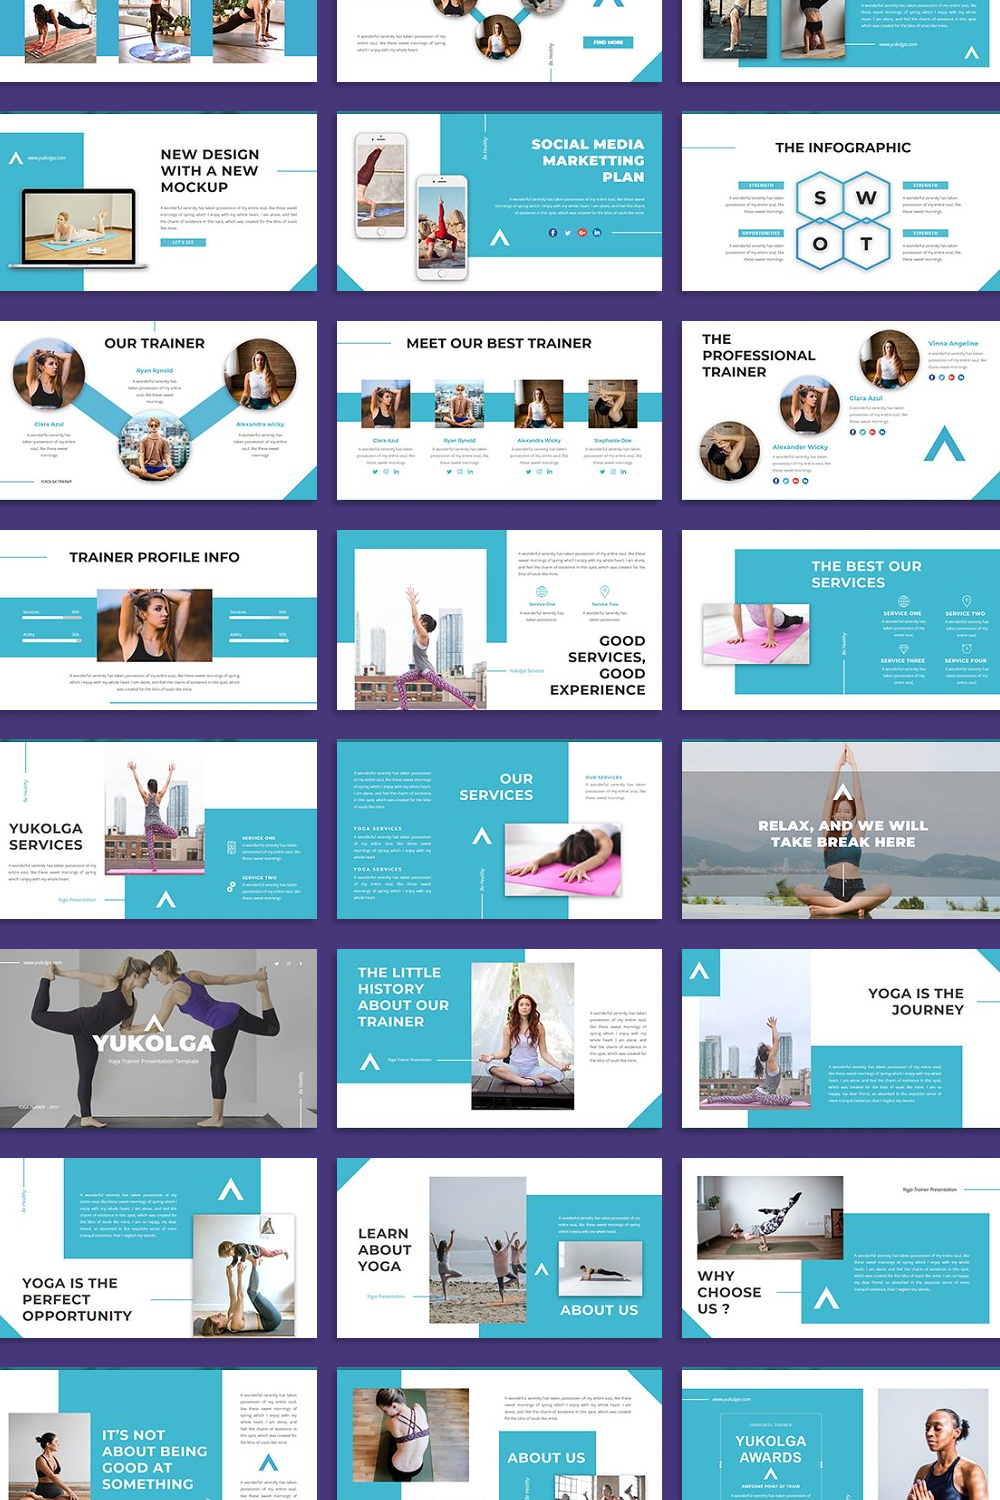 Unique slides with images of people doing yoga.